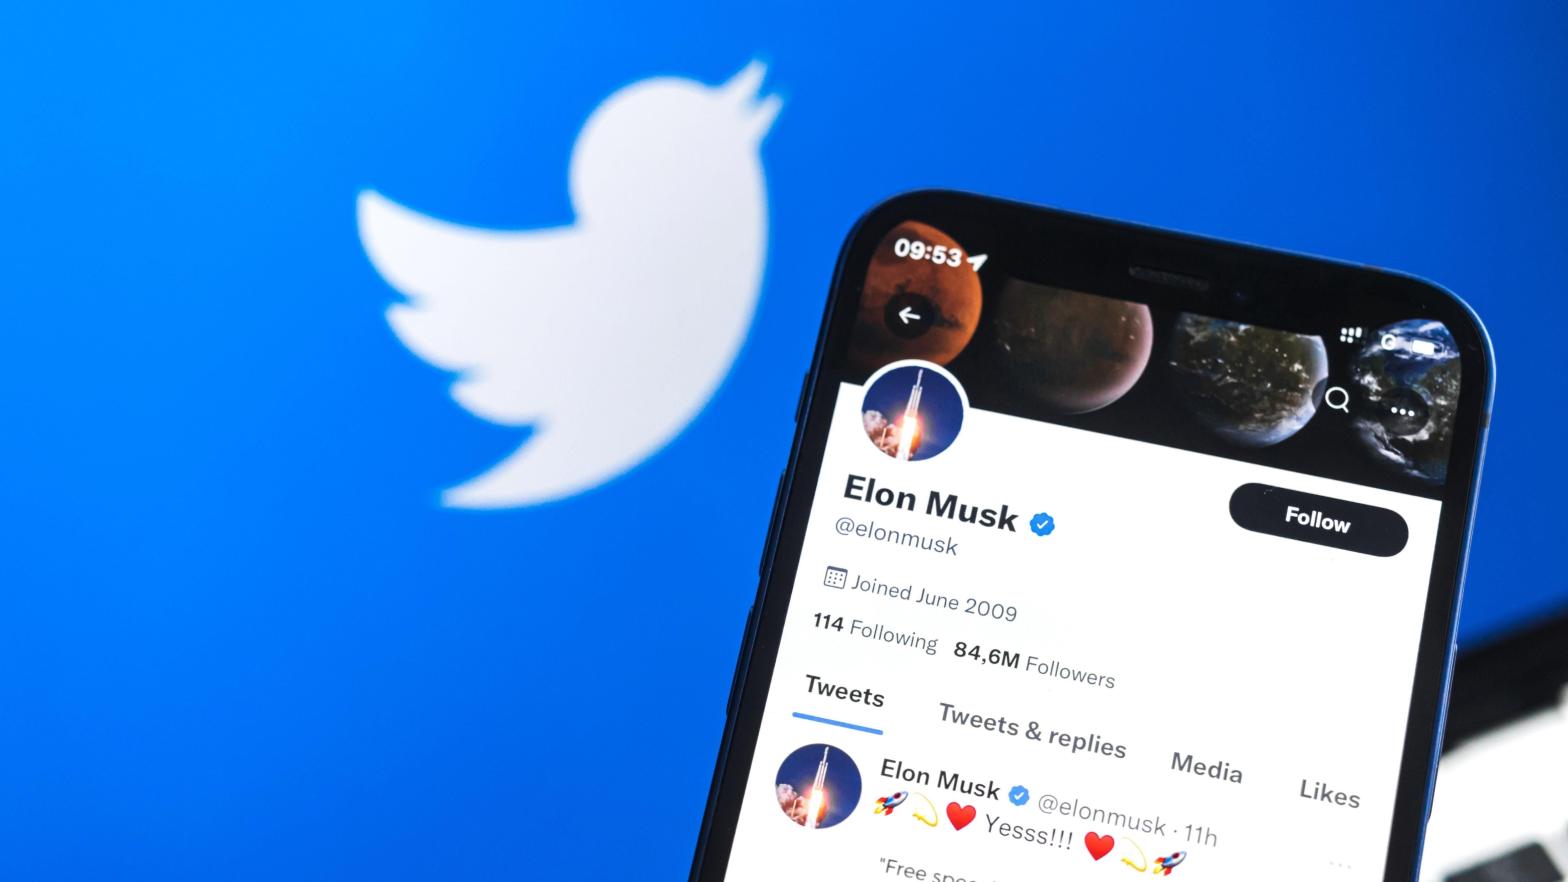 Remember when Elon Musk was actually excited to buy Twitter? Seems like ages ago. (Image: FellowNeko, Shutterstock)